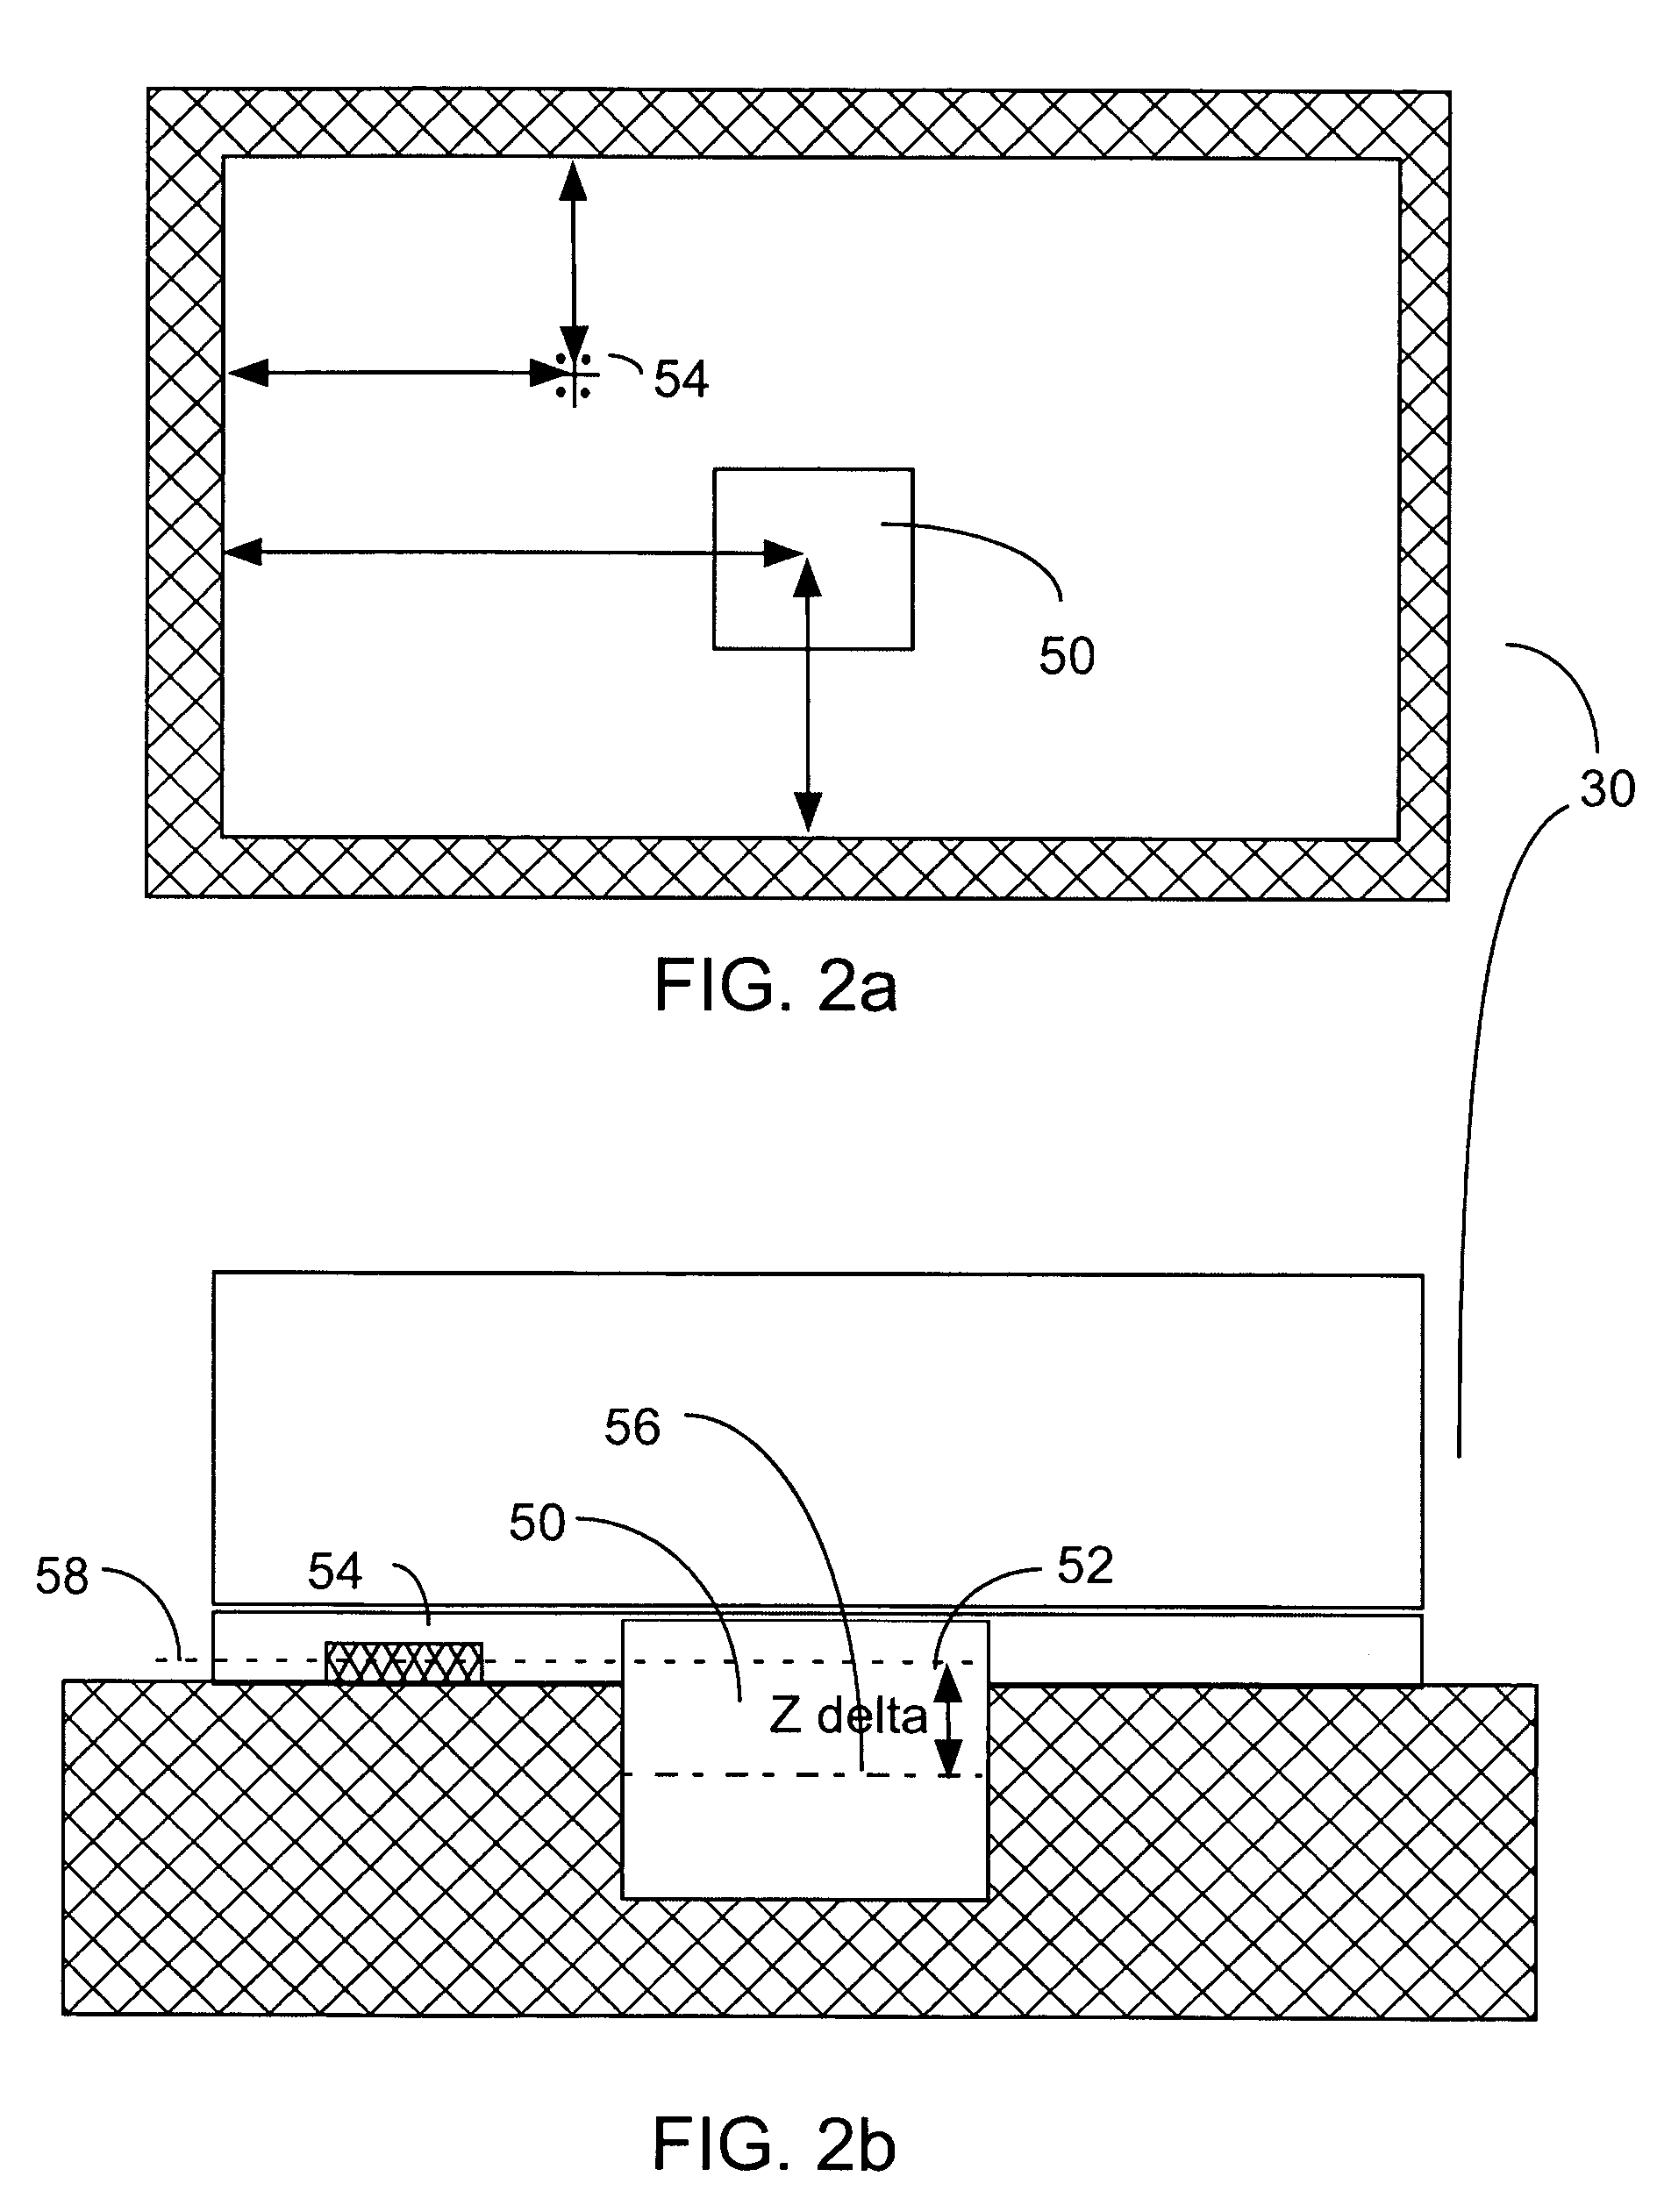 Image processing method and system for microfluidic devices